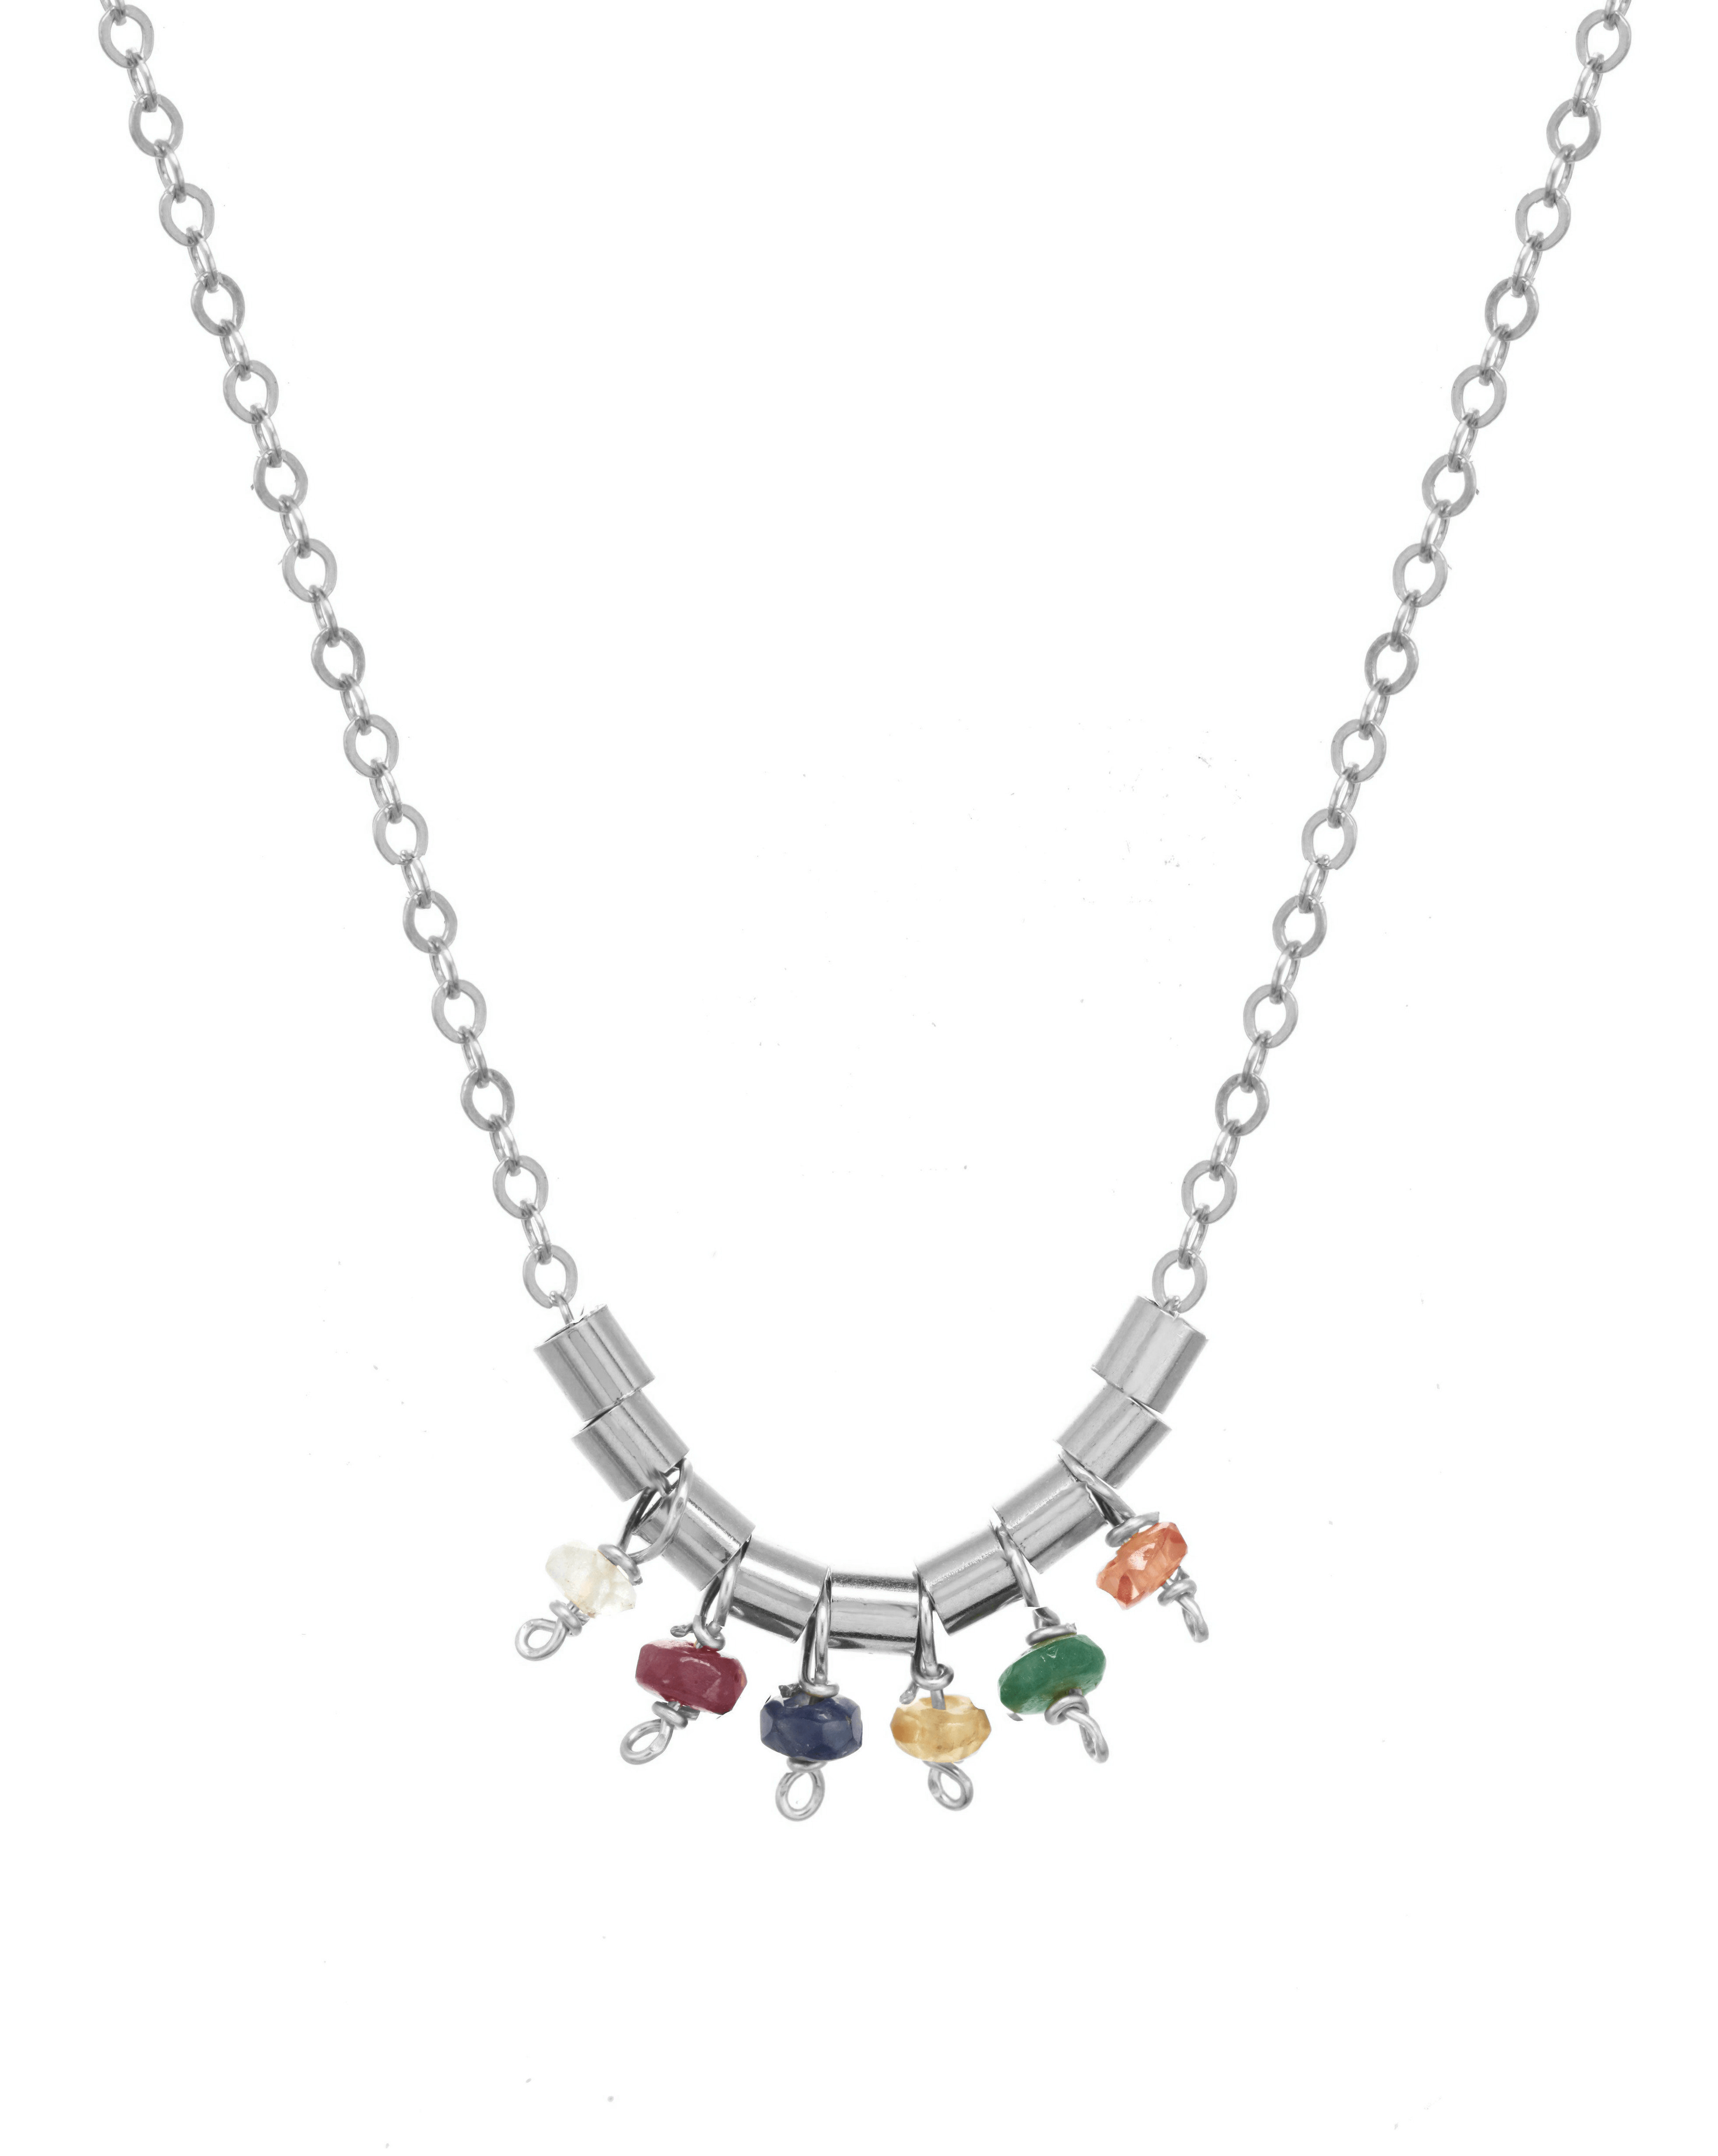 Salma Necklace by KOZAKH. A 16 to 18 inch adjustable length necklace, crafted in Sterling Silver, featuring 2mm Faceted round Emerald, Garnet, Sapphire, Tourmaline, Tanzanite and Topaz.